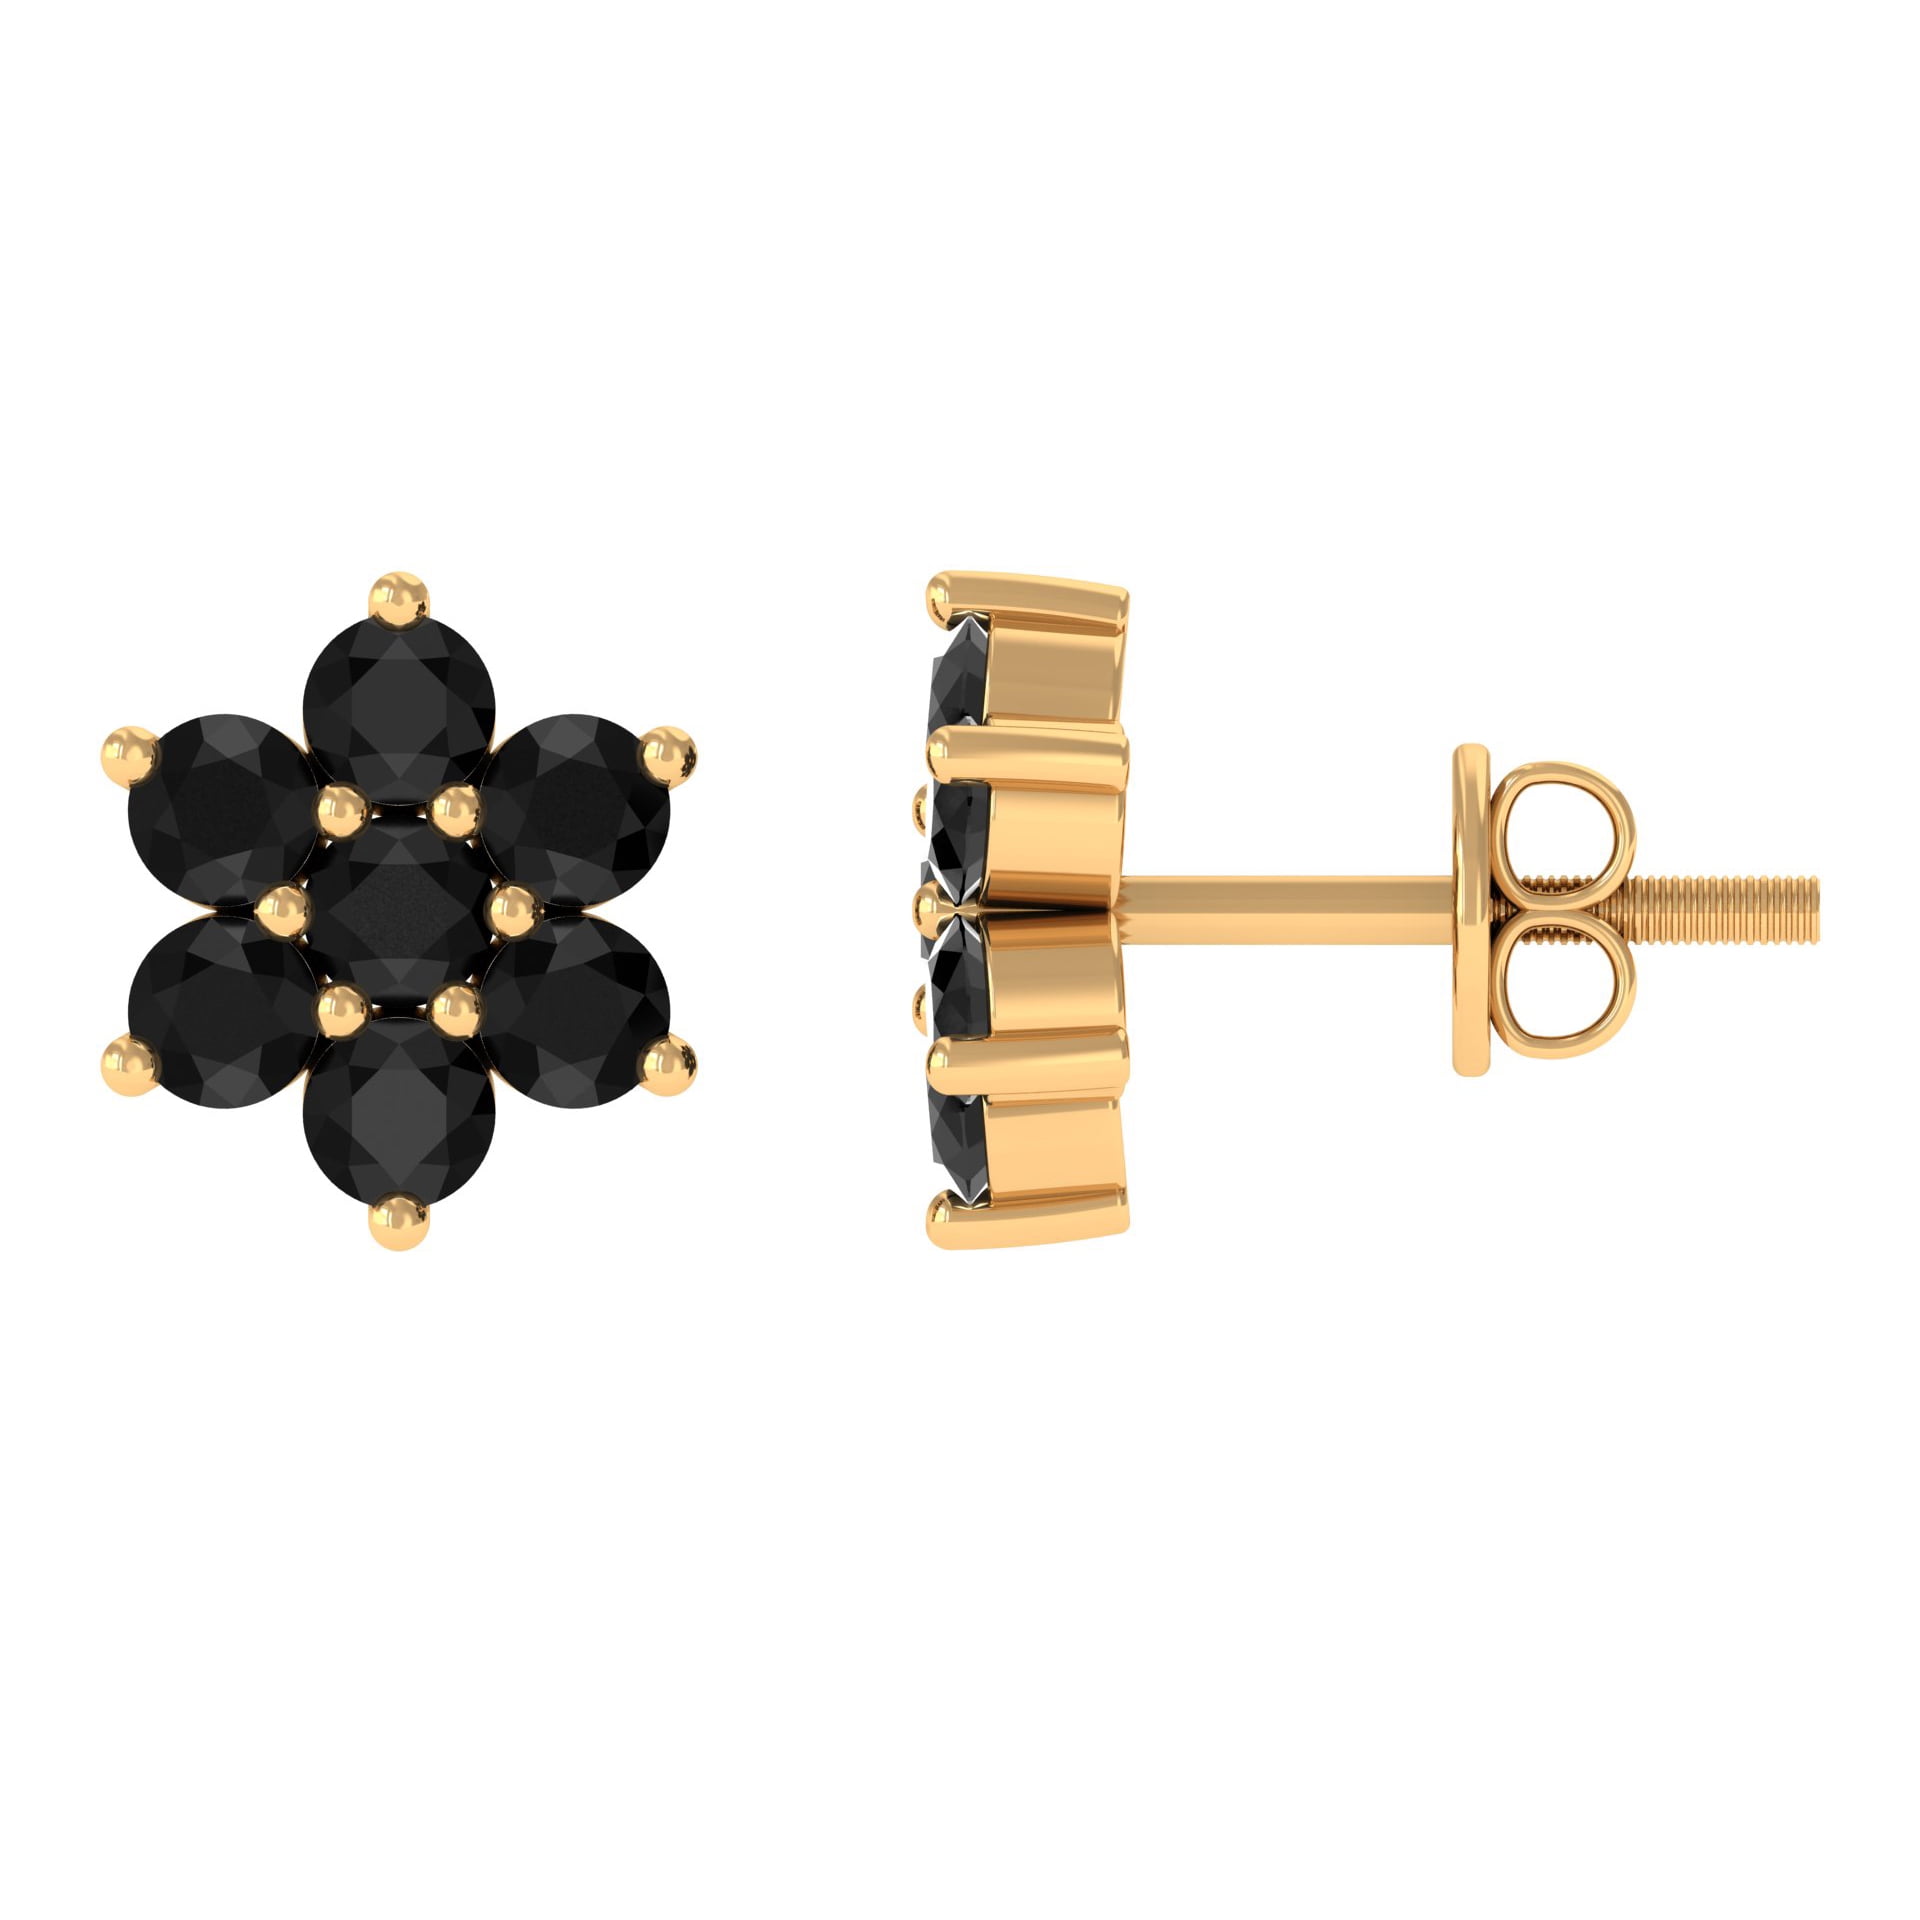 1.25 CT Black Spinel Floral Cluster Stud Earrings, 14K Yellow Gold